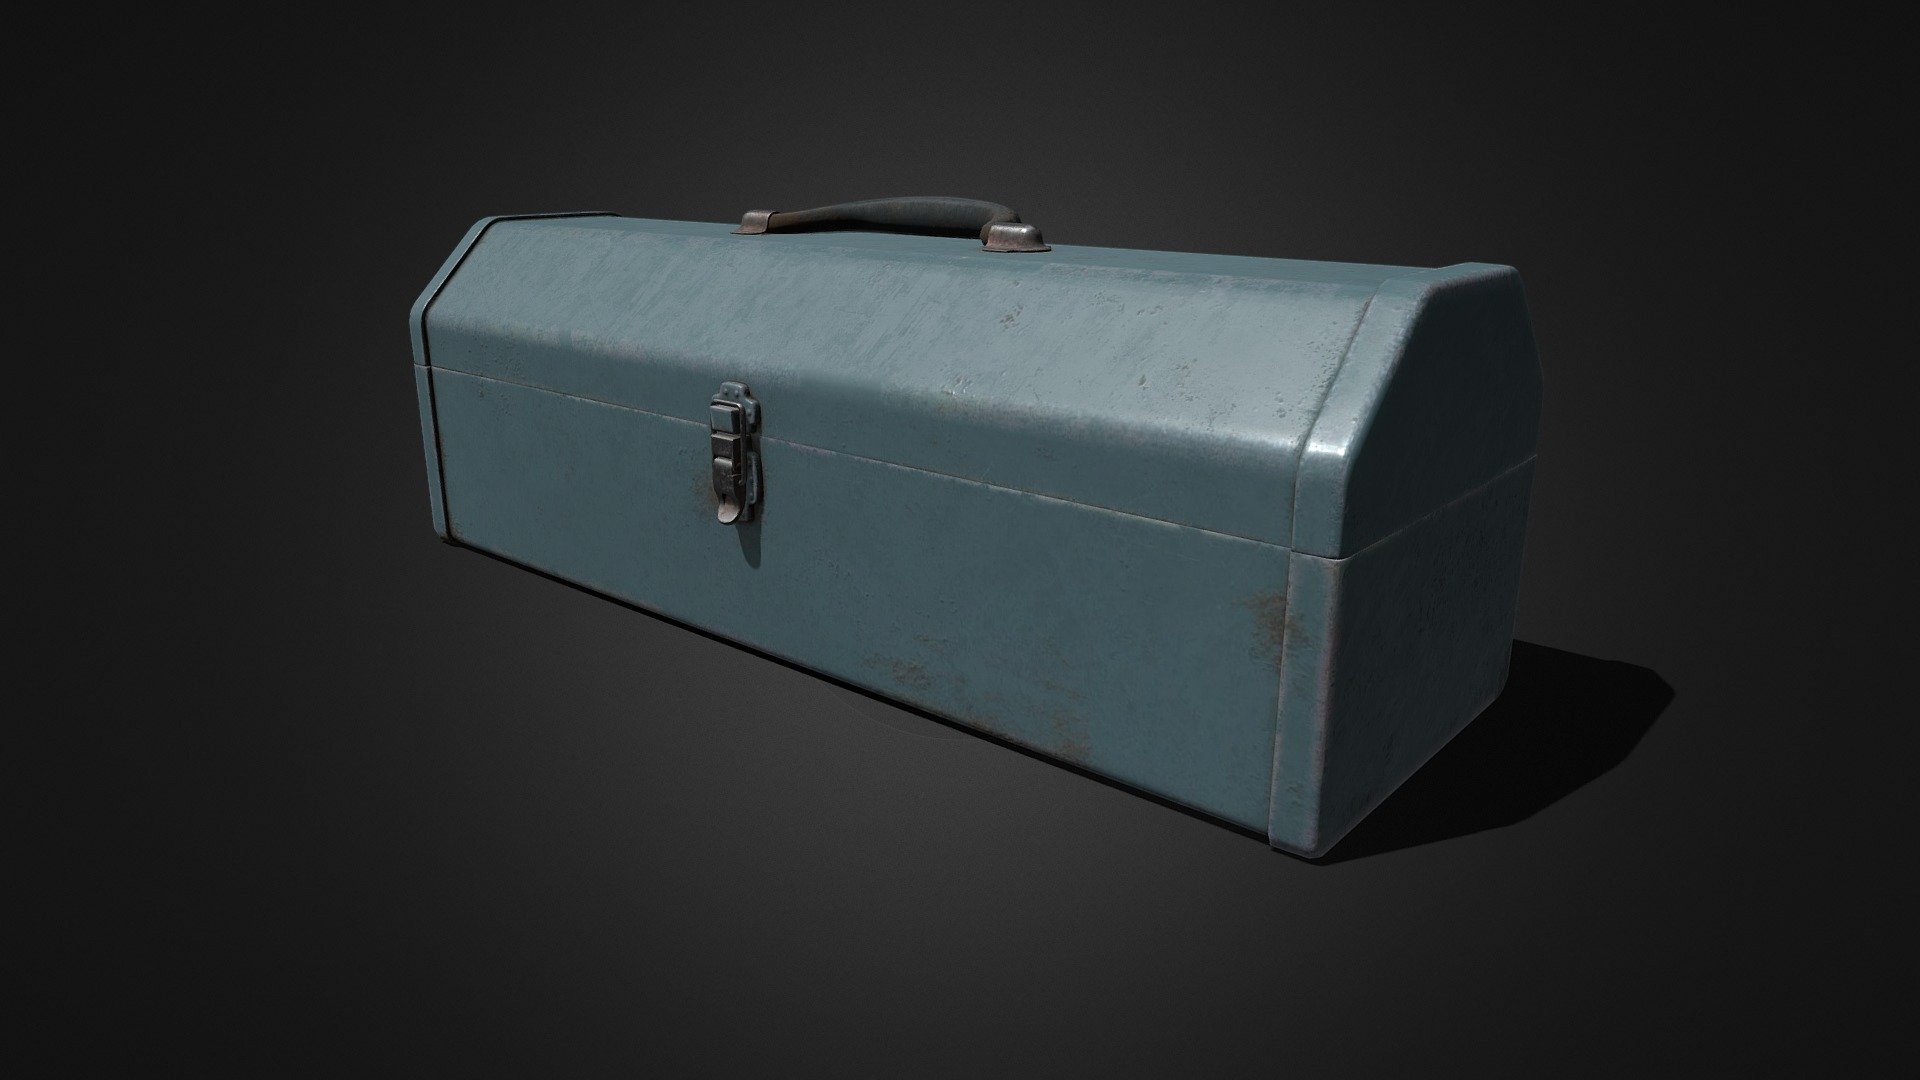 Vintage Tool Box low-poly 3d model ready for games and other real-time apps.
Included 3ds max 2015 file with CAT rig and quad mesh.

Texture Sizes: 2048 x 2048

Dimensions: X 16.7cm  Y 46.5cm  Z 16.7cm - Vintage Tool Box (Animated) - Buy Royalty Free 3D model by uno 3d model